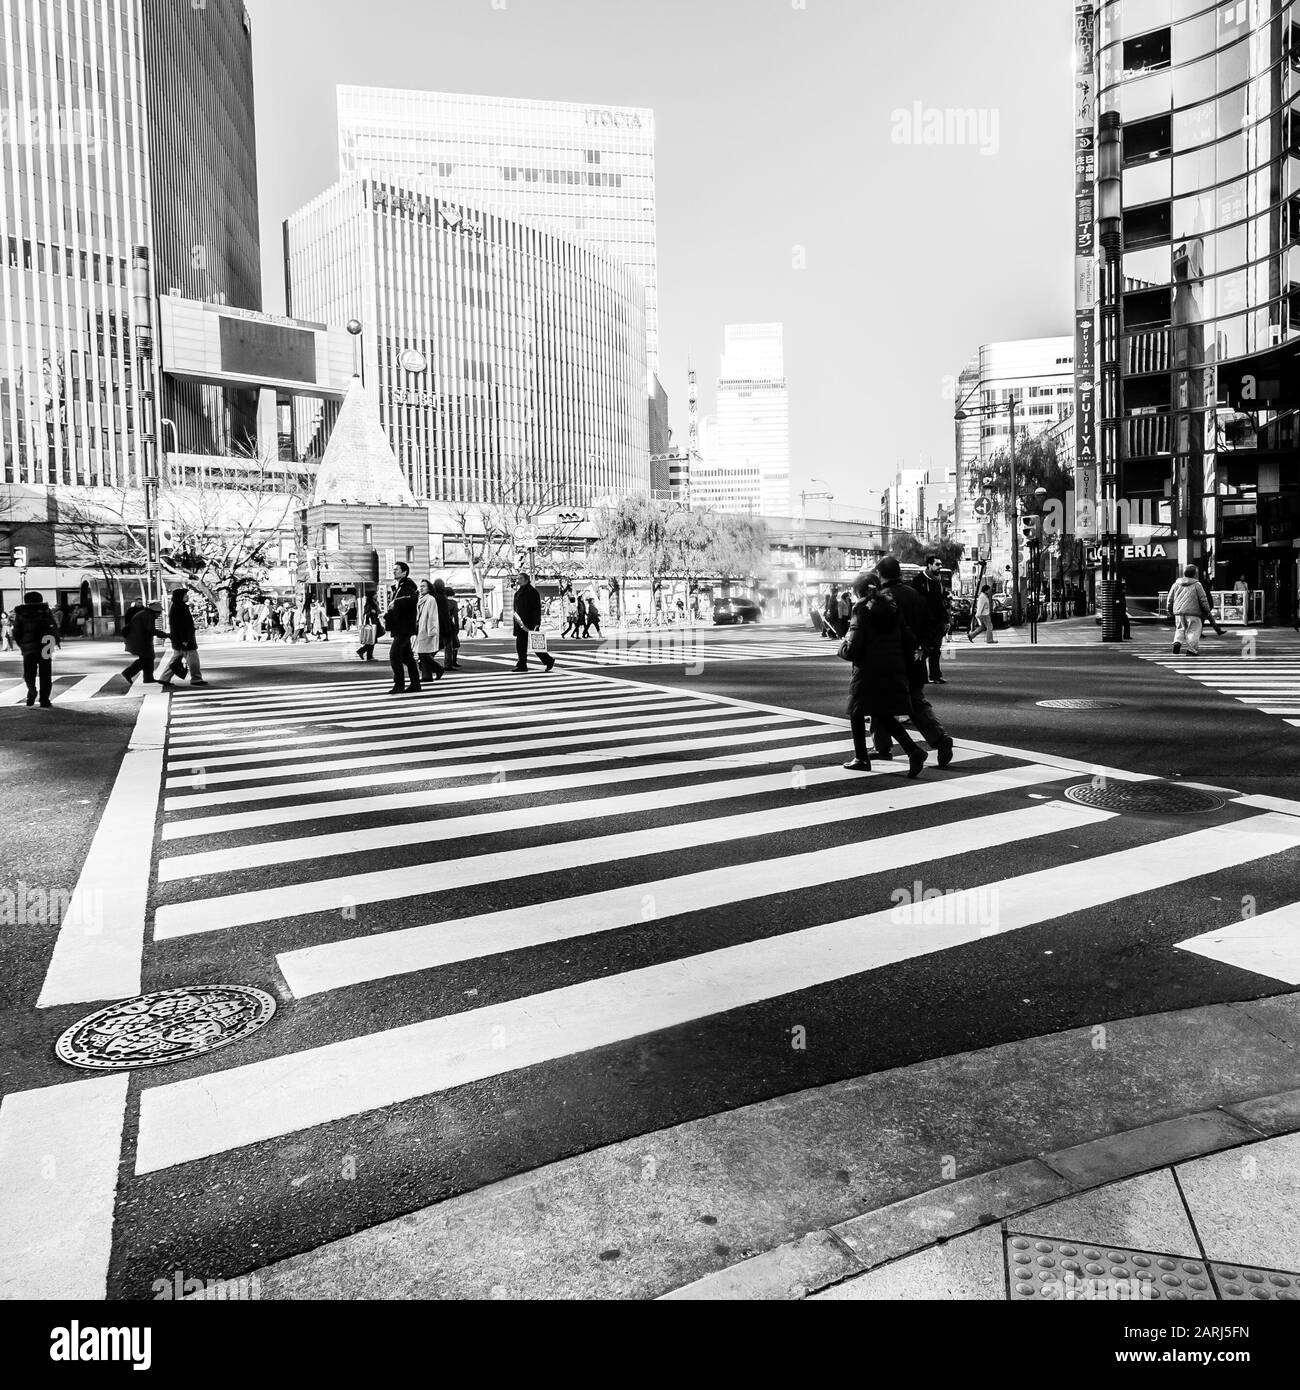 Tokyo, Japan - January 1, 2010: Pedestrians crossing the street at the heart of Ginza District in Tokyo. Ginza crossing in the afternoon. Stock Photo